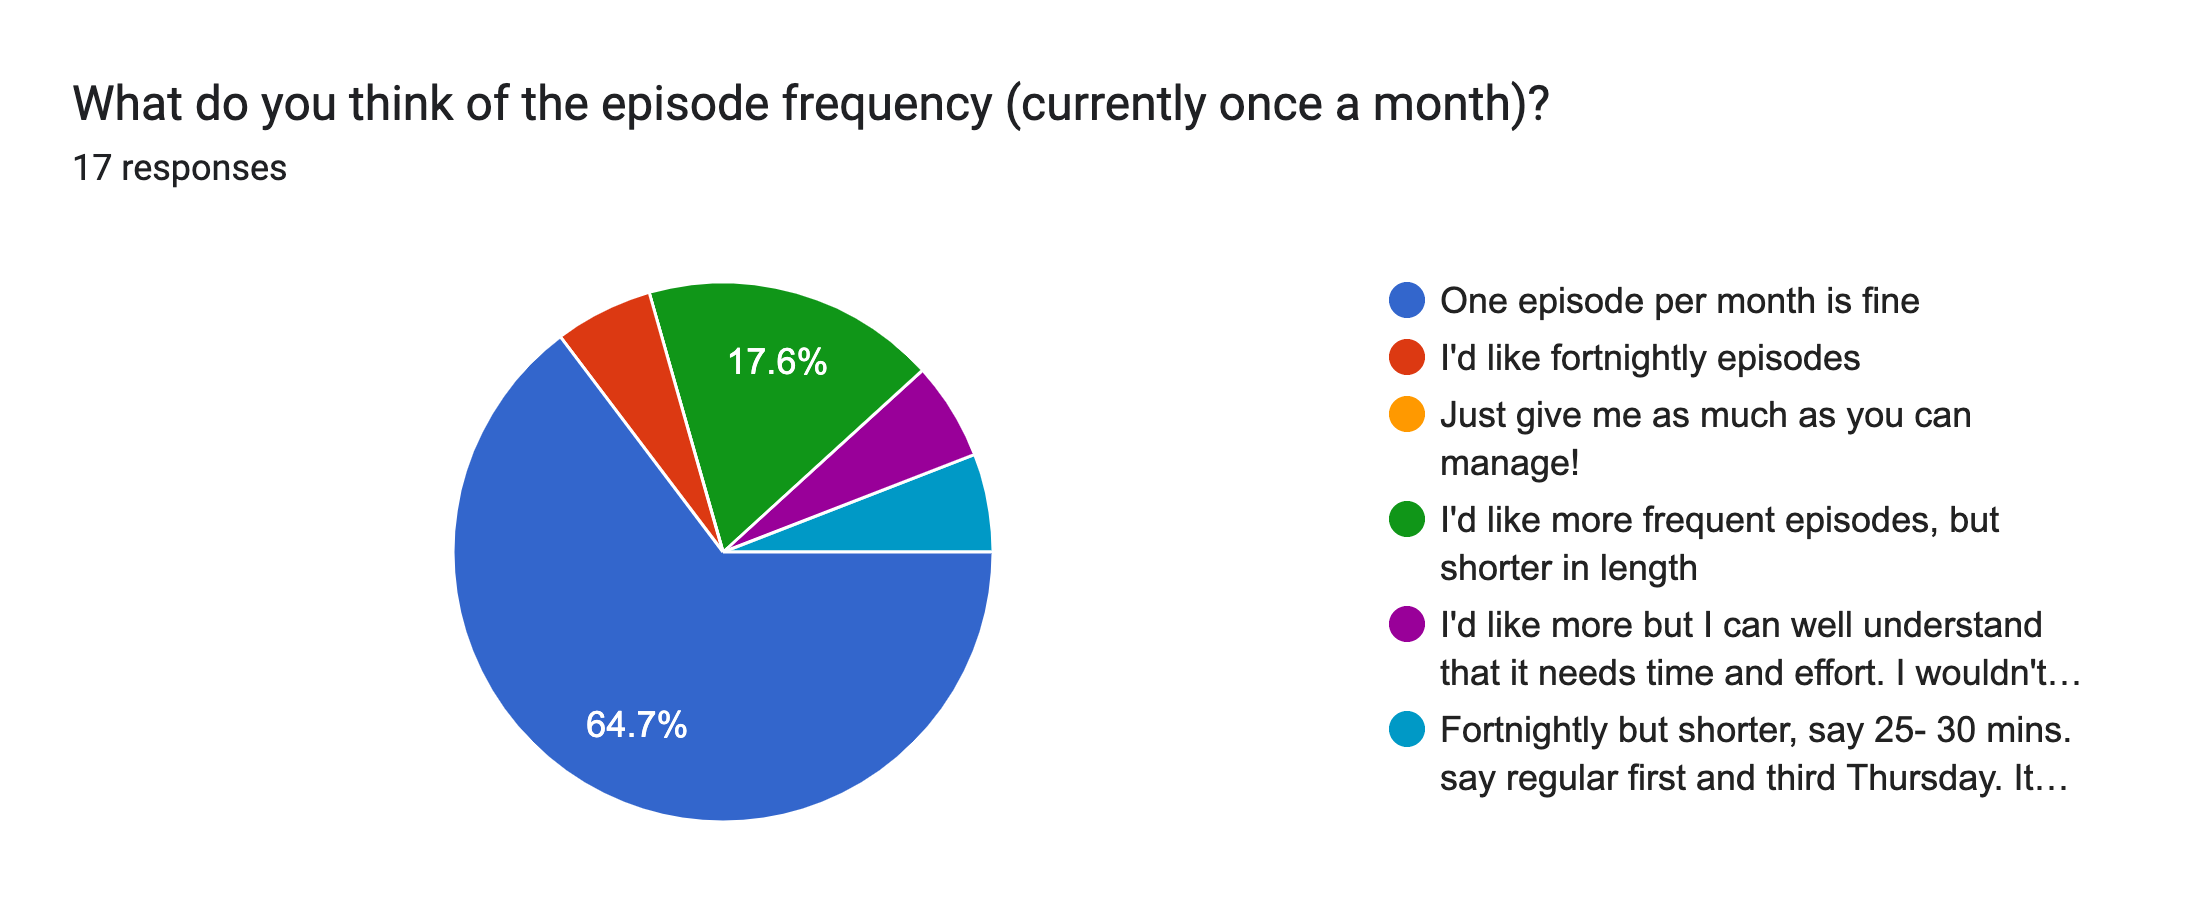 Forms response chart. Question title: What do you think of the episode frequency (currently once a month)?. Number of responses: 17 responses.